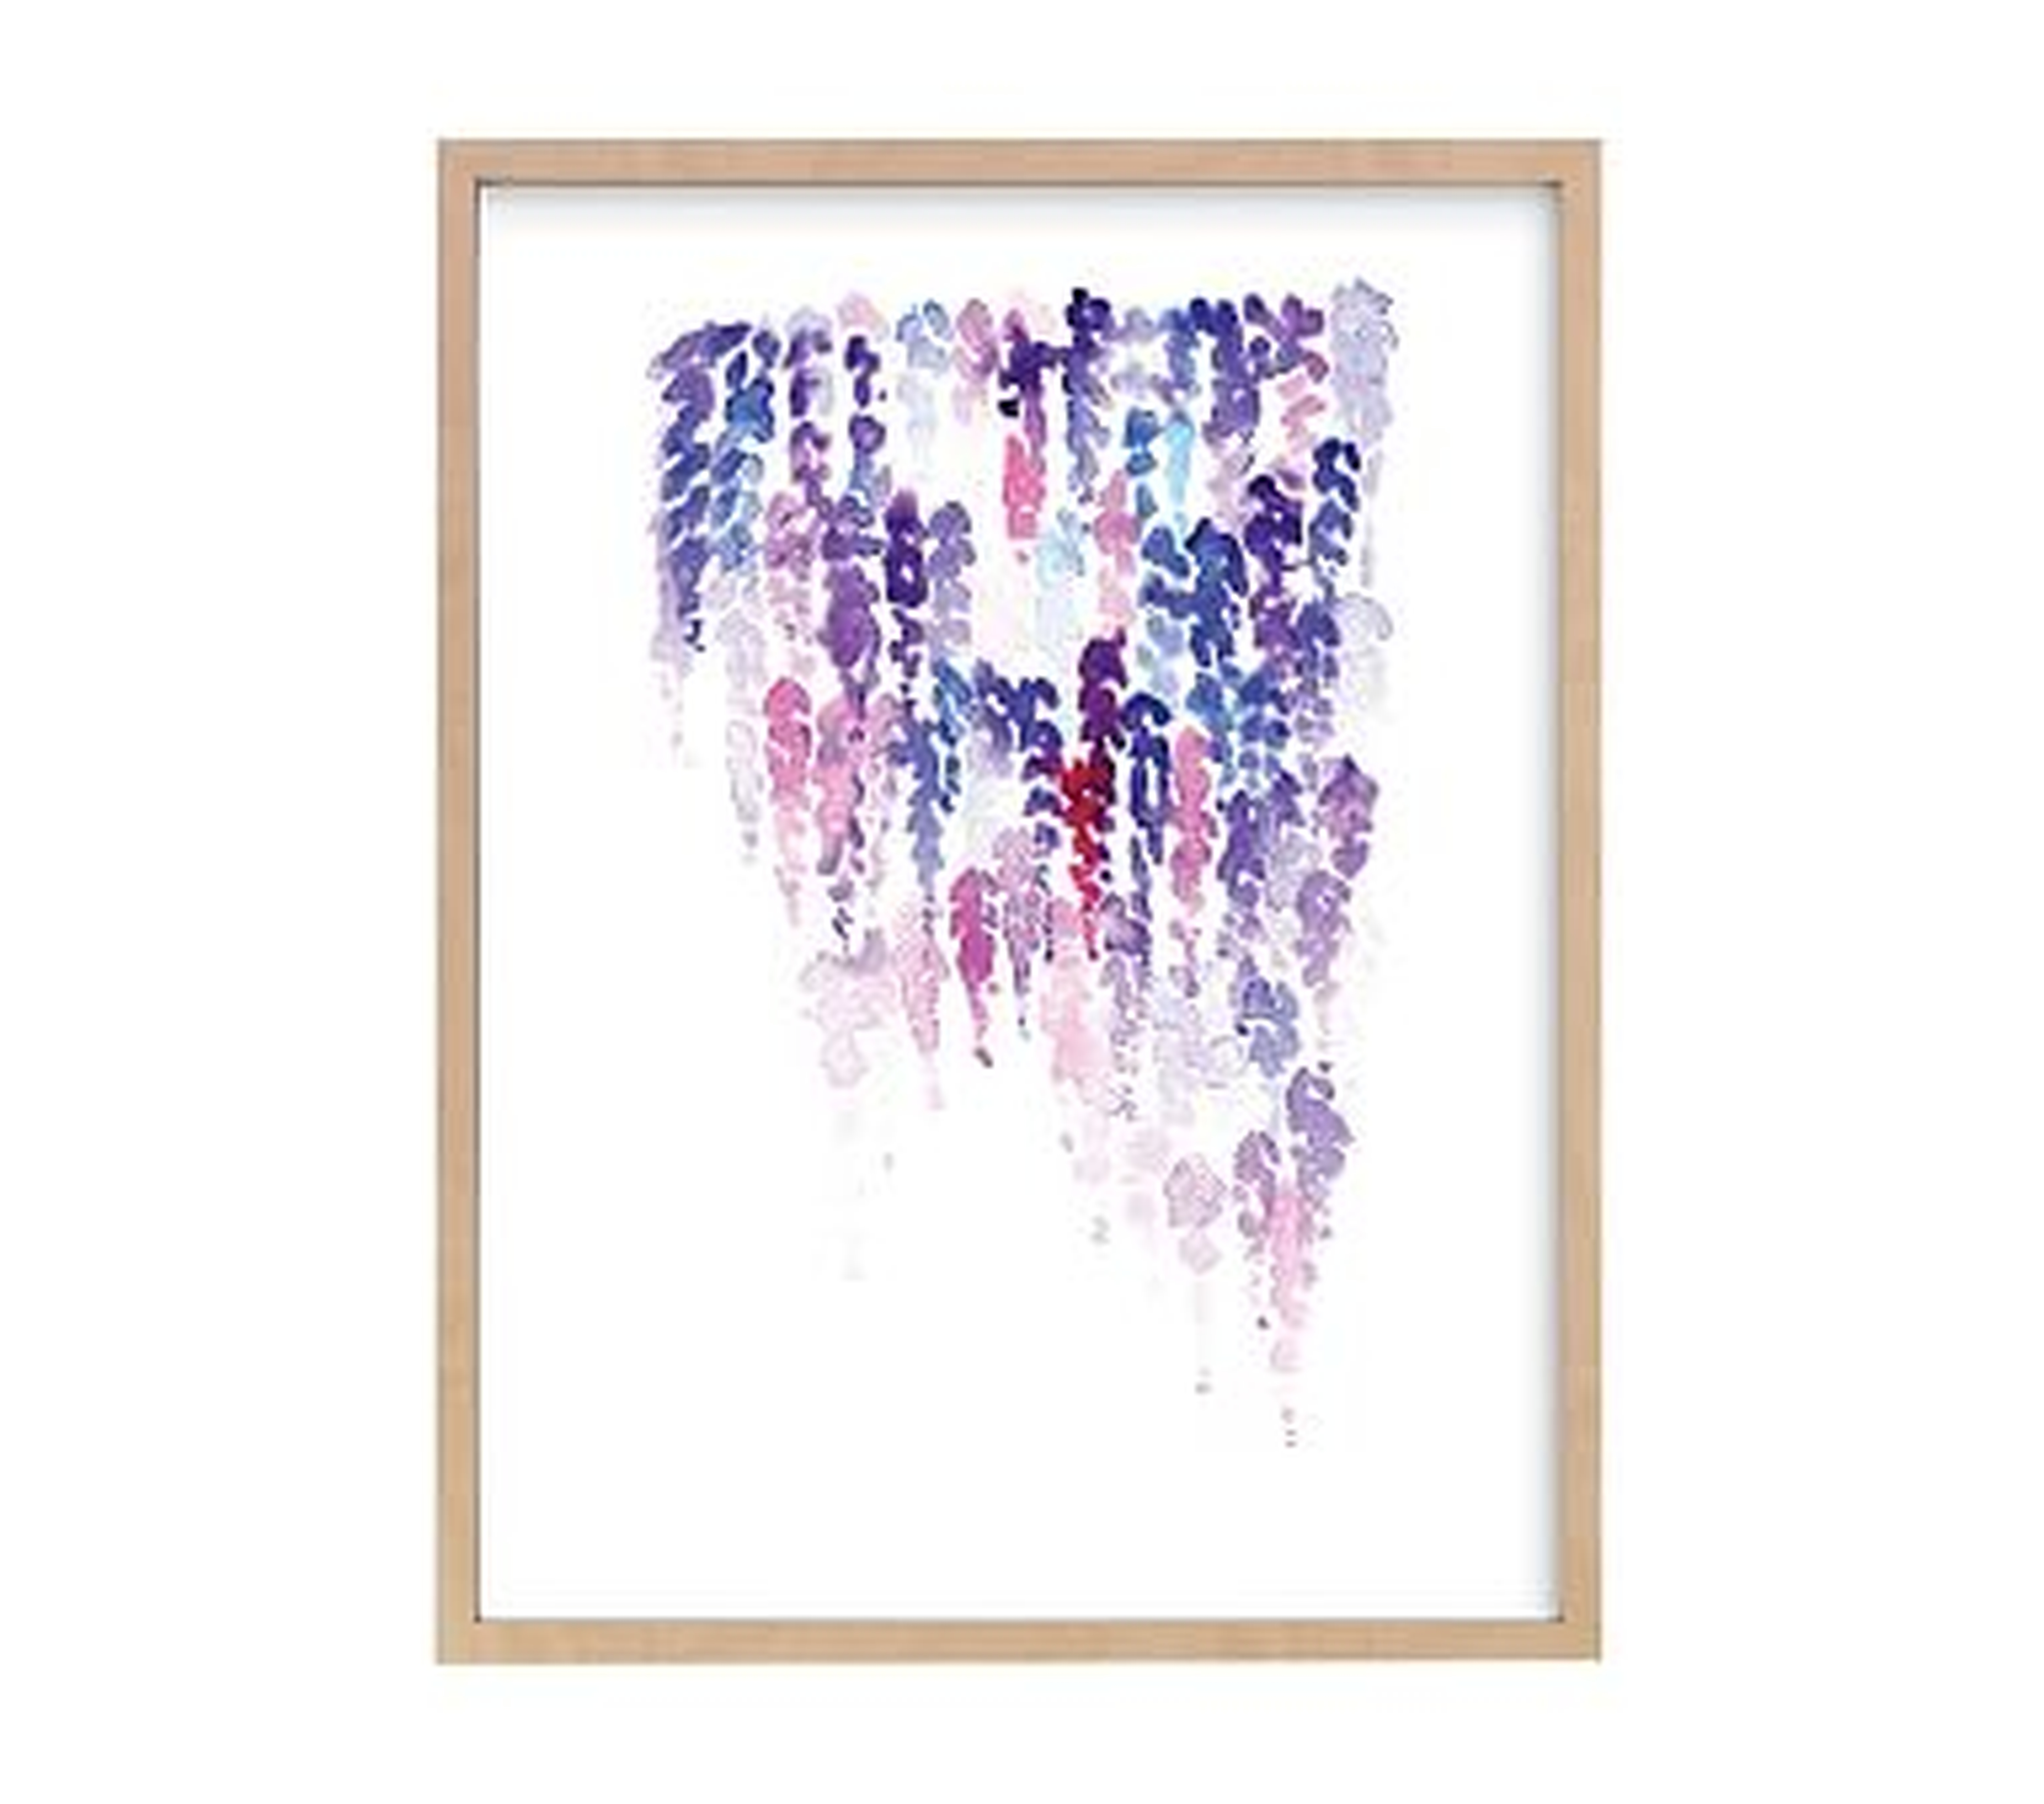 Lavender Rain, Wall Art by Minted(R), 16x20, Natural - Pottery Barn Kids